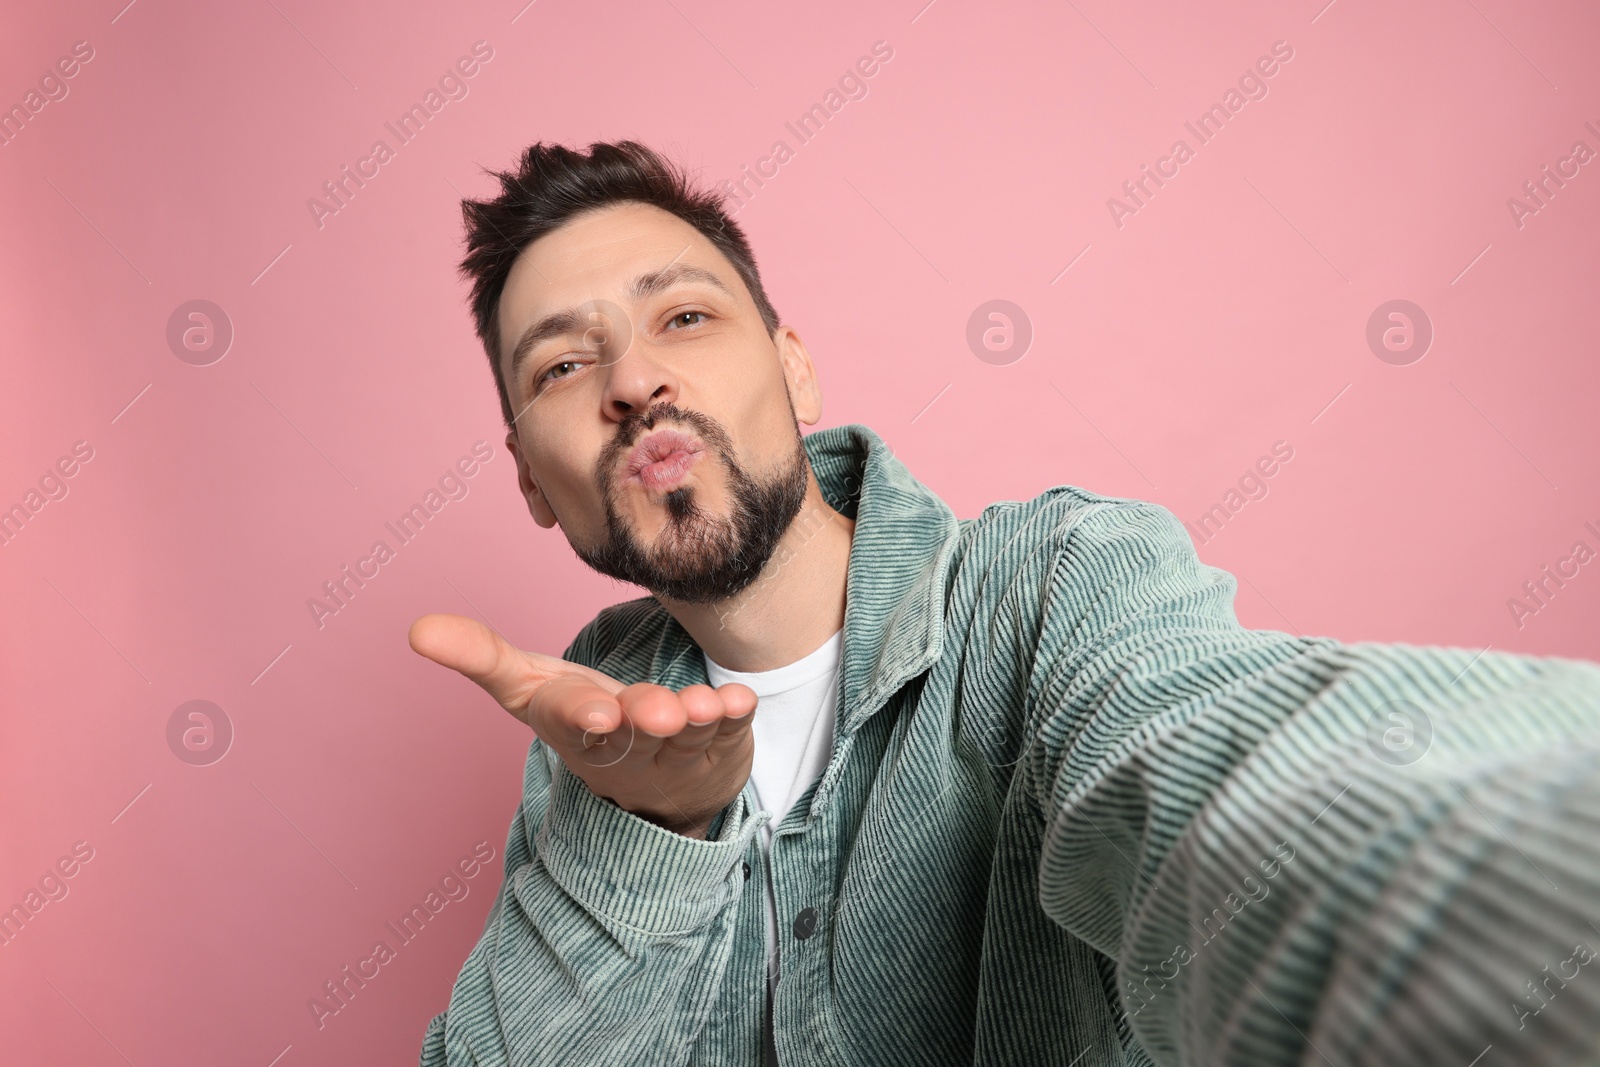 Photo of Handsome man blowing kiss while taking selfie on pink background